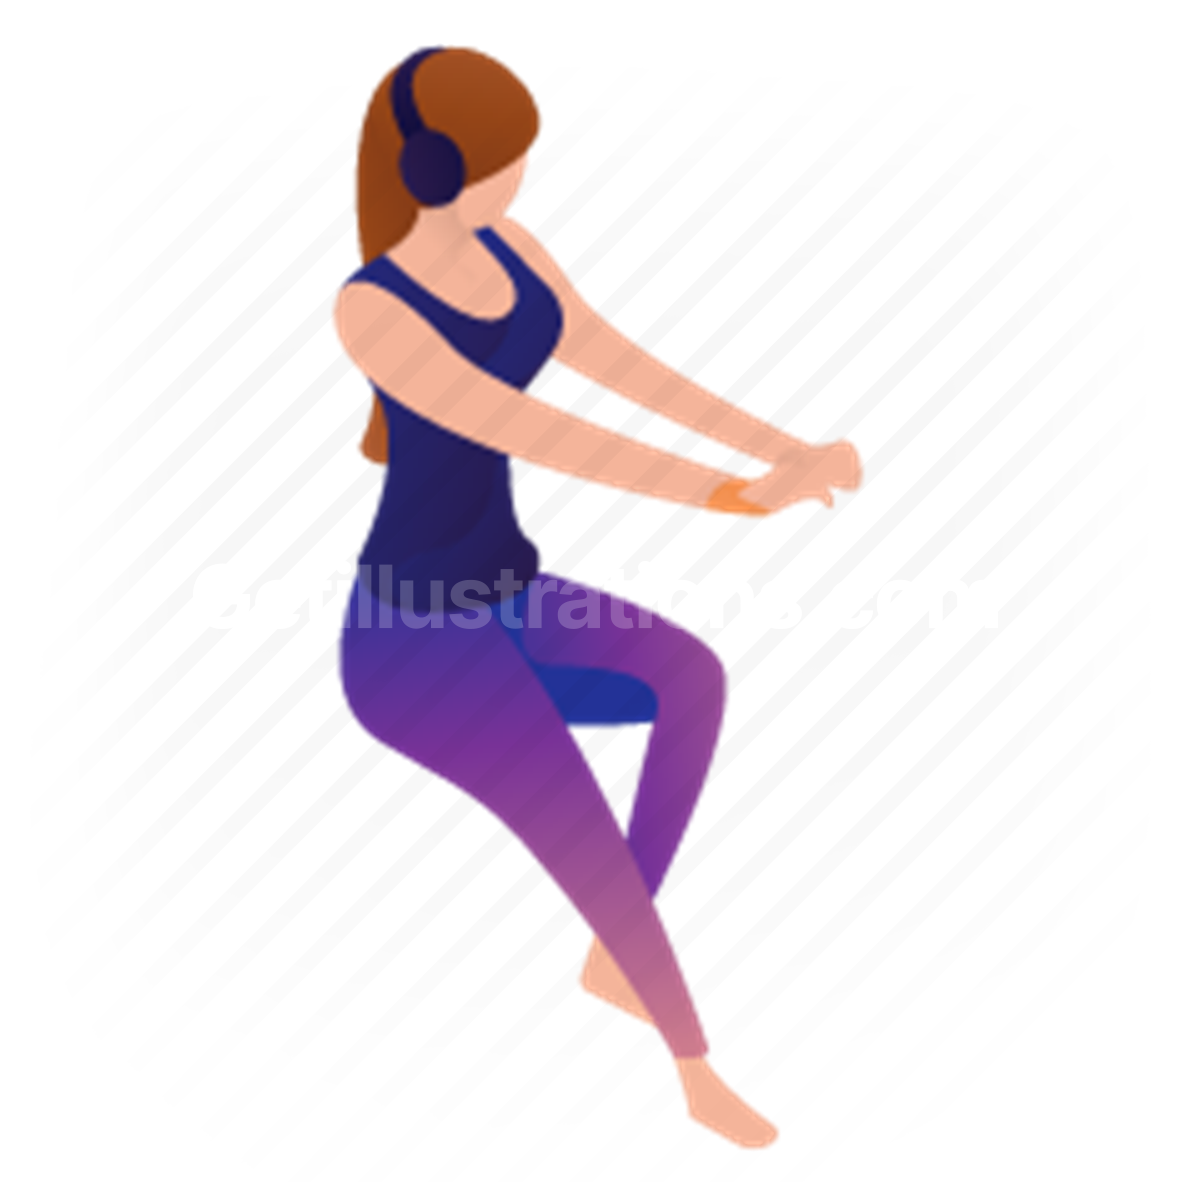 seated, sitting, sit, position, gesture, woman, casual, headphones